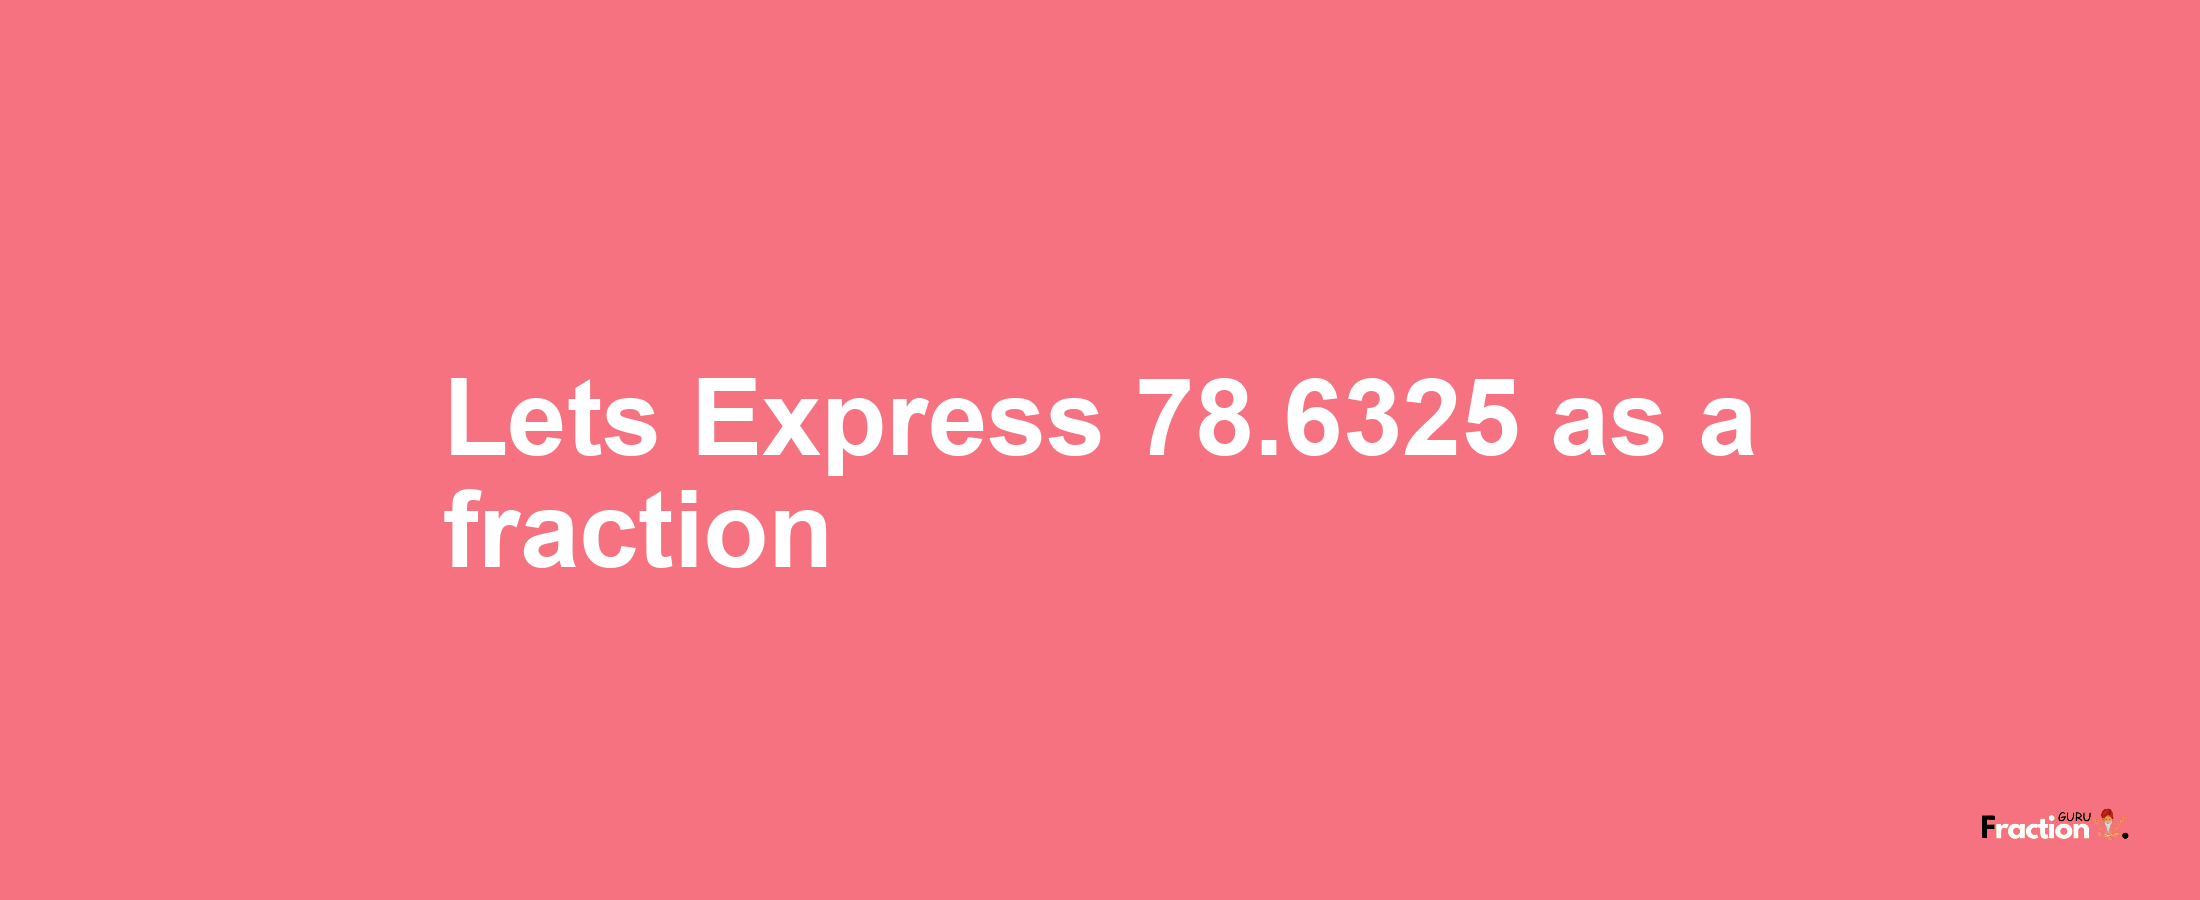 Lets Express 78.6325 as afraction